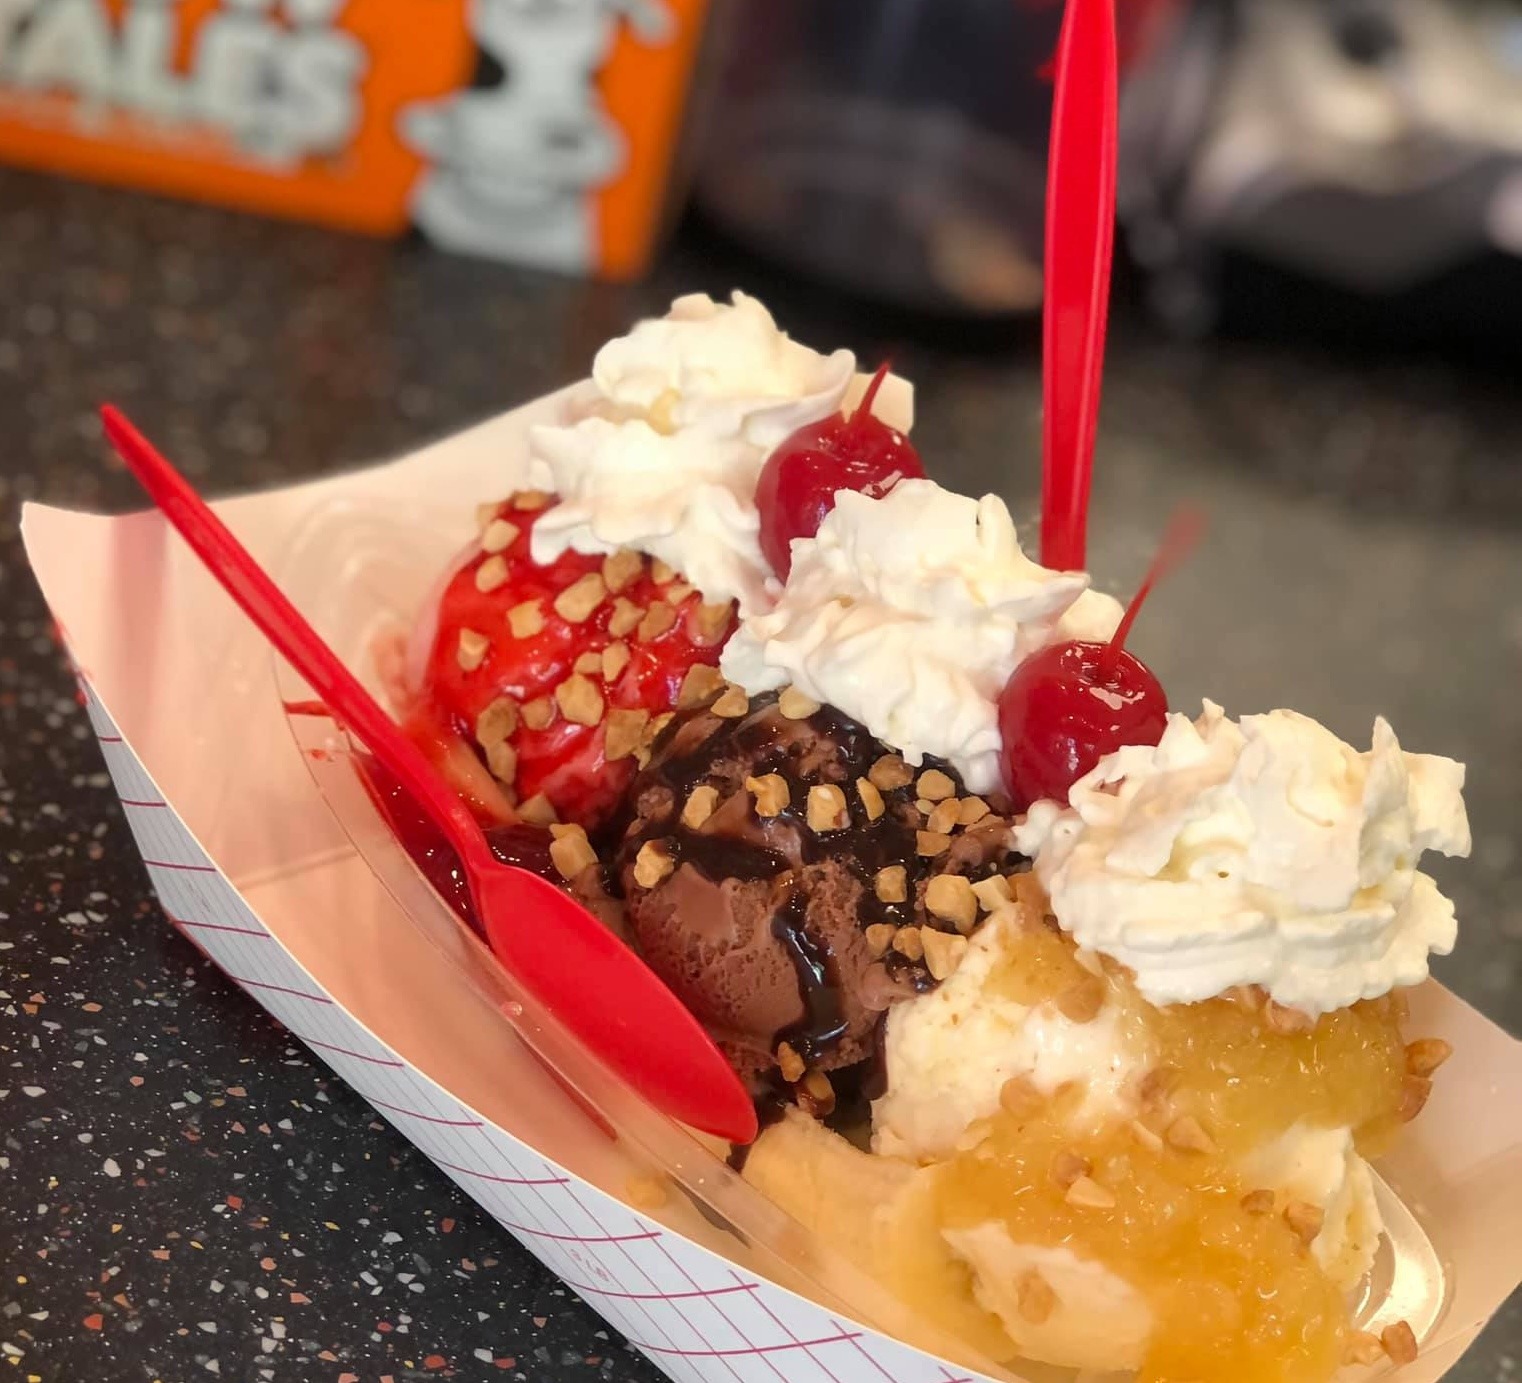 7 Favorite Ice Cream Spots in Myrtle Beach image thumbnail